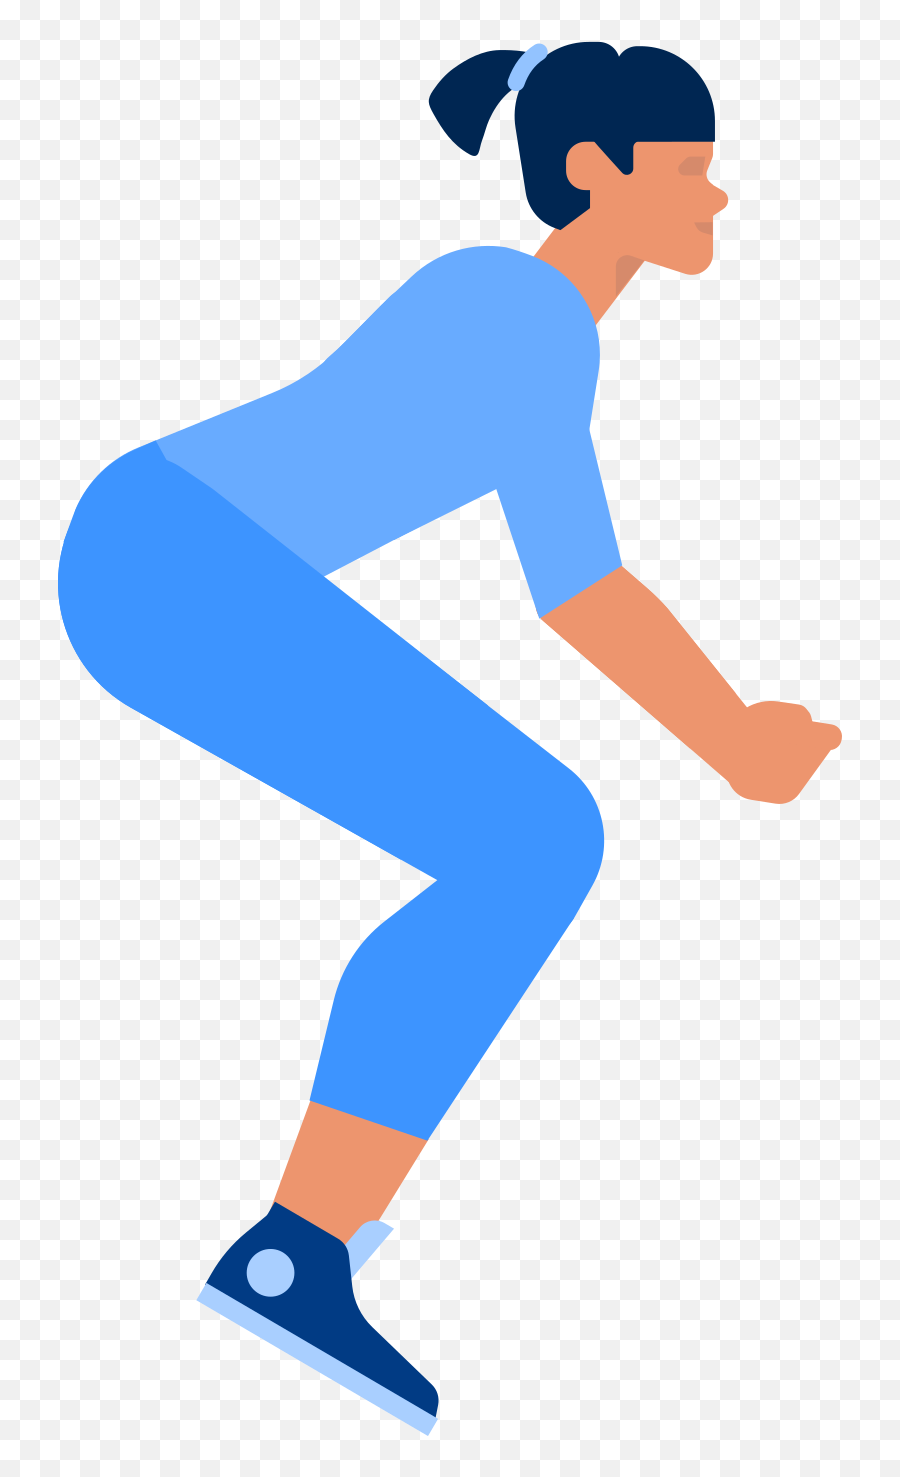 Style Girl Vector Images In Png And Svg Icons8 Illustrations - For Running,Running Woman Icon